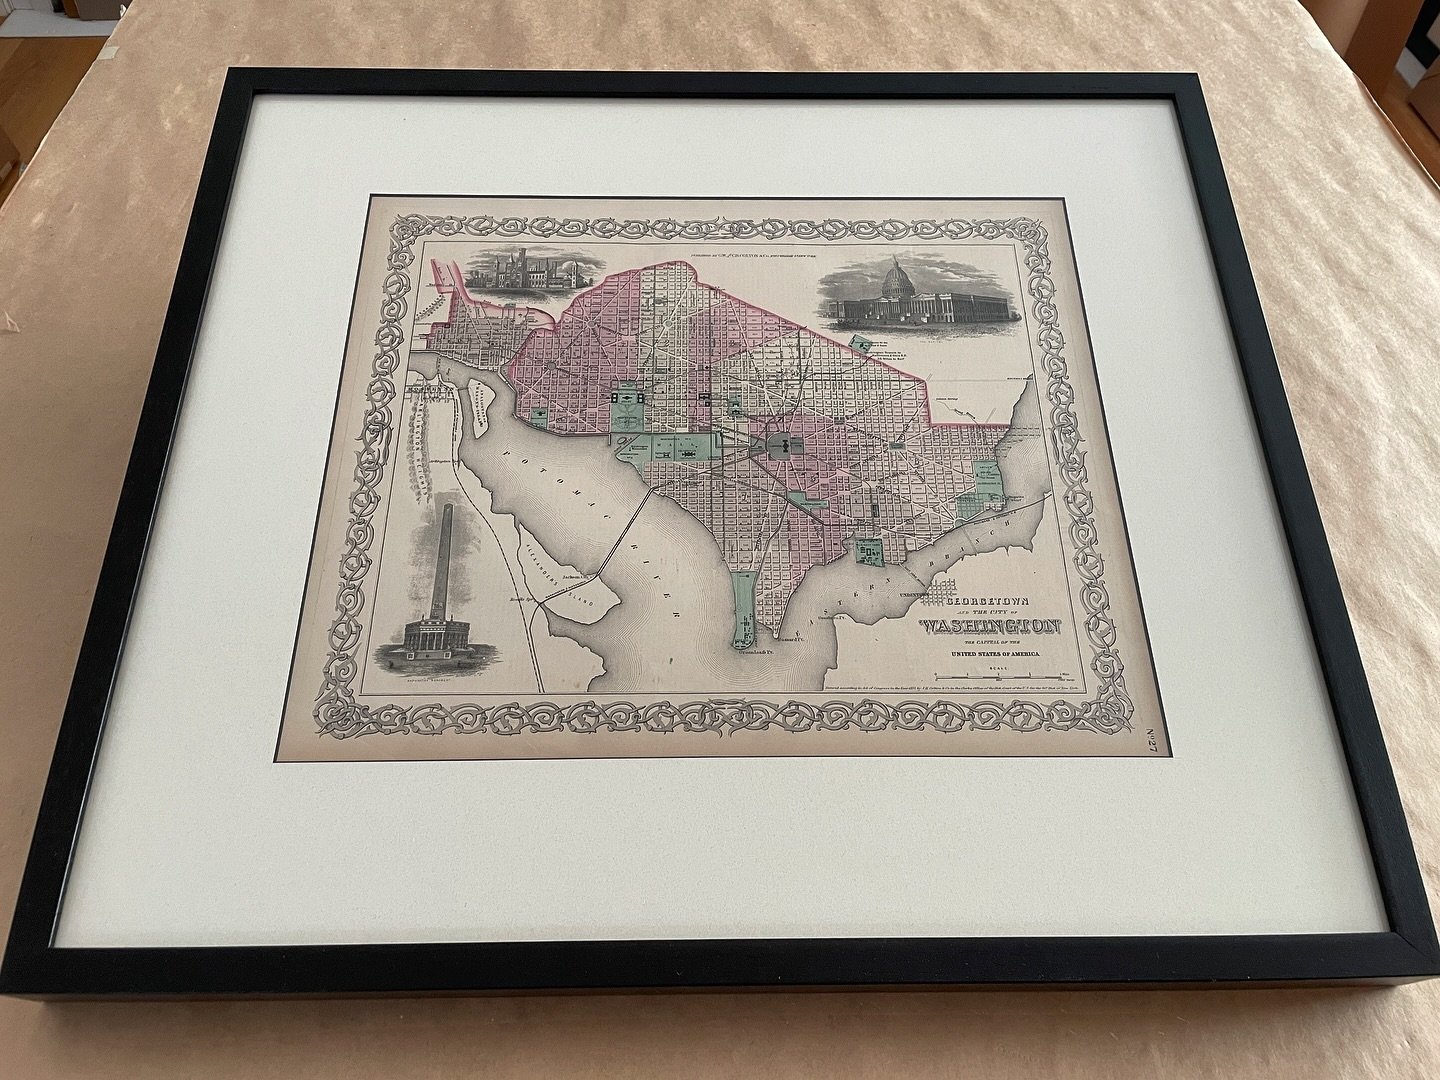 A beautiful old map of Georgetown &amp; Washington DC. 

I always like to start with the matting first. Find that foundation before looking at frames. I&rsquo;m always looking for something neutral on flows with the piece. A dark mat can really close